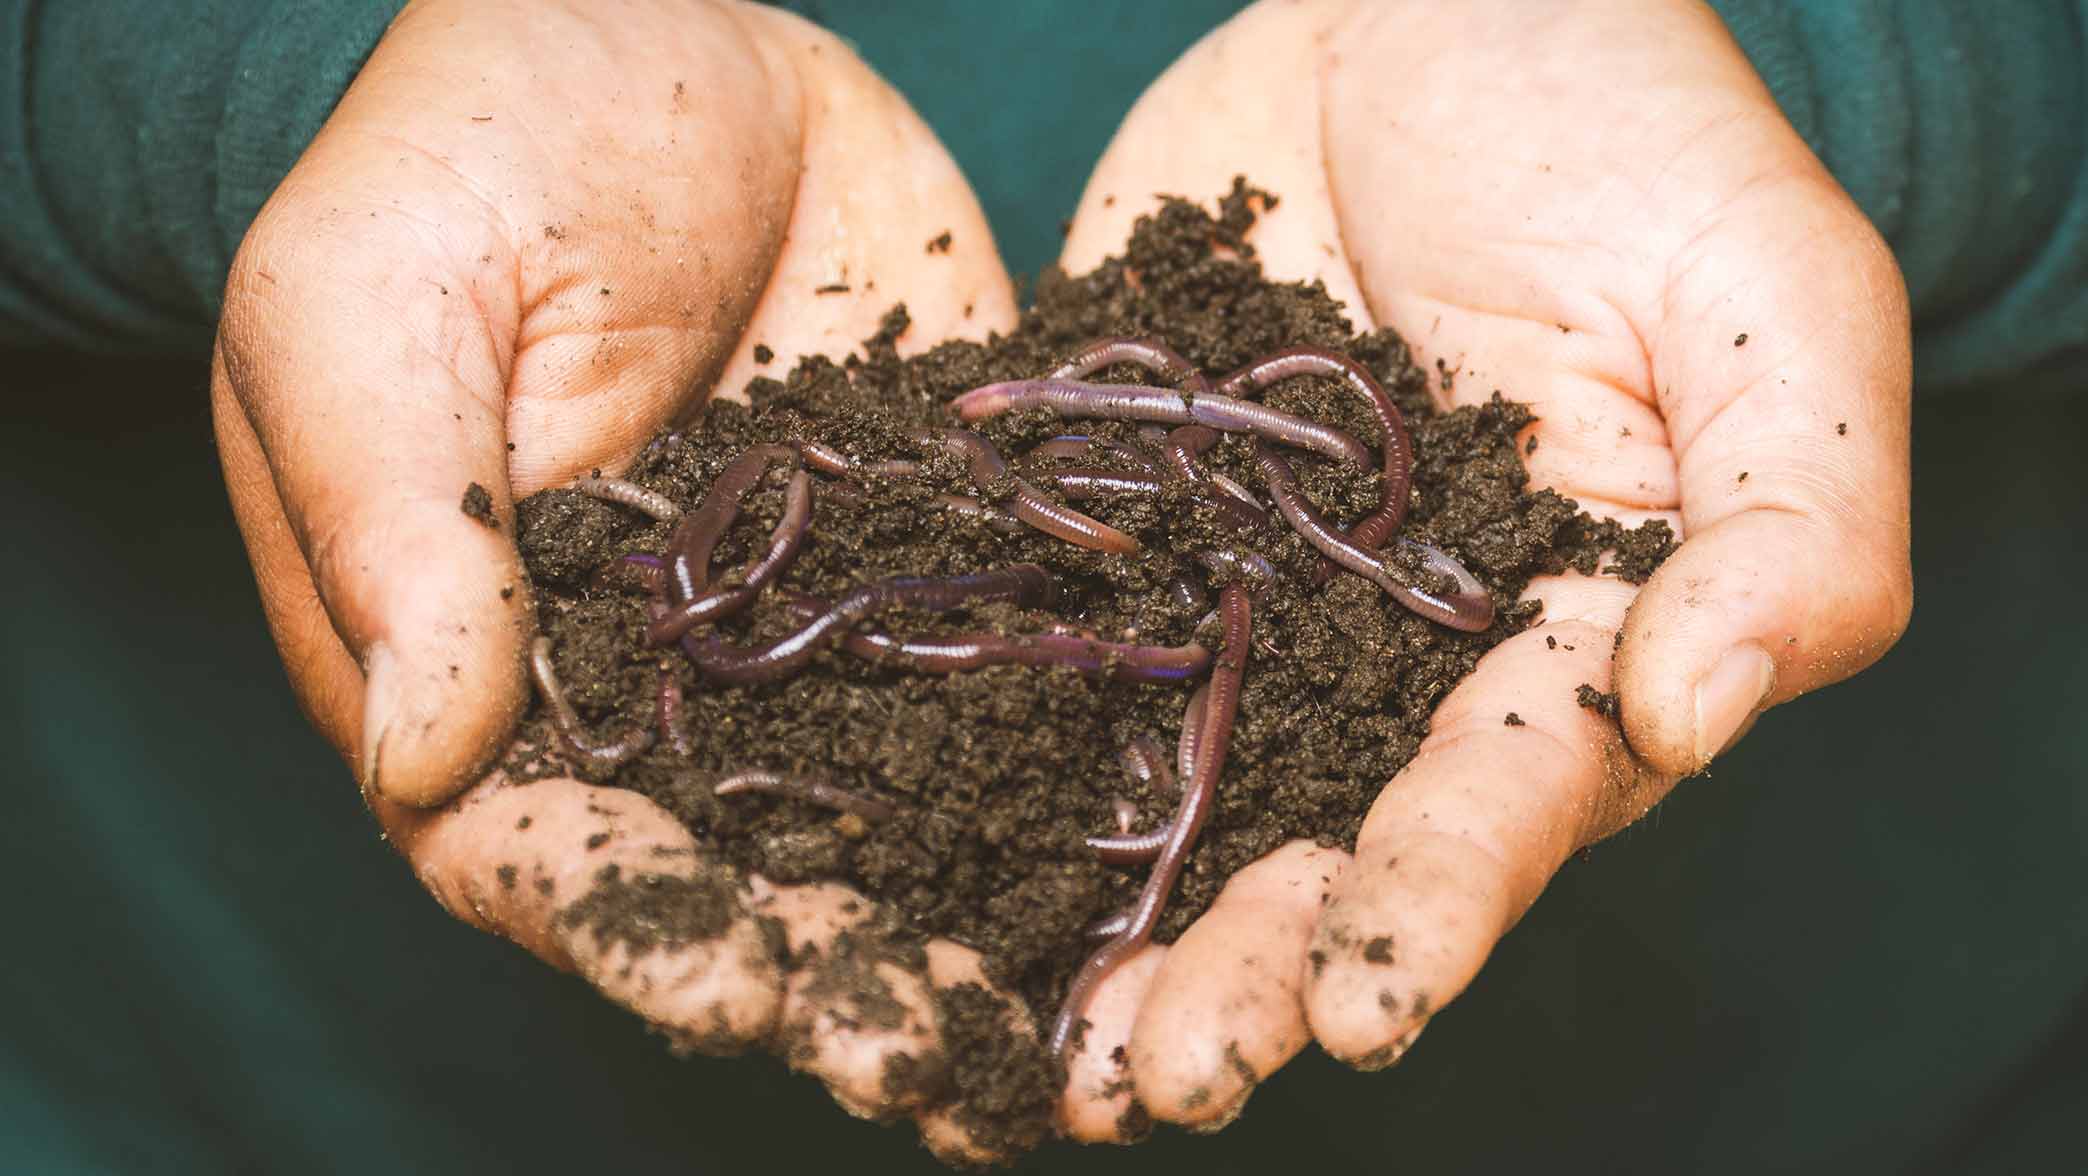 How should we value ecosystem services? Image shows hands holding soil filled with worms.